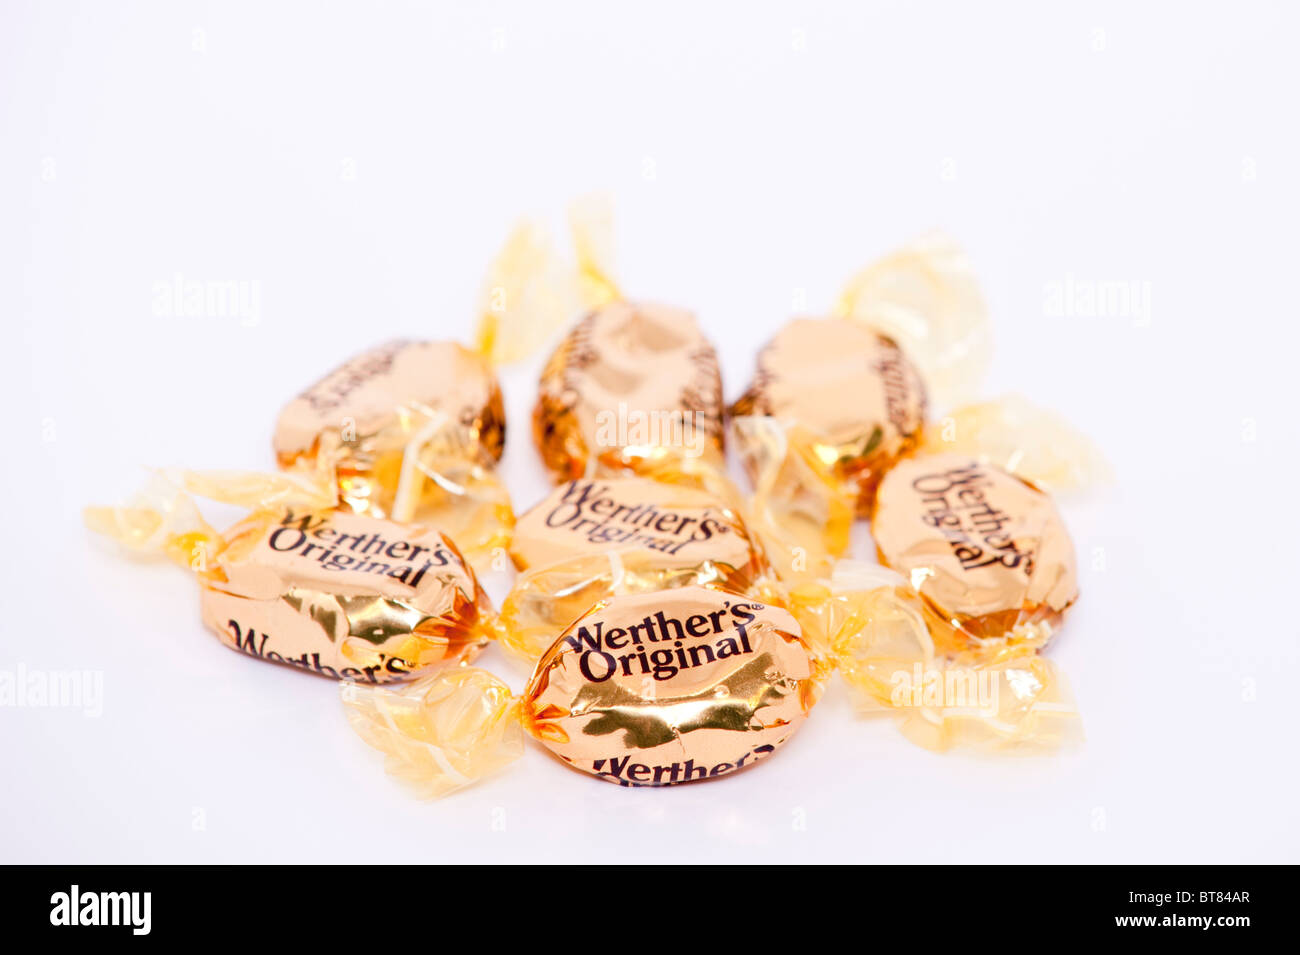 A close up photo of some Werthers Original butter candies sweets against a white background Stock Photo